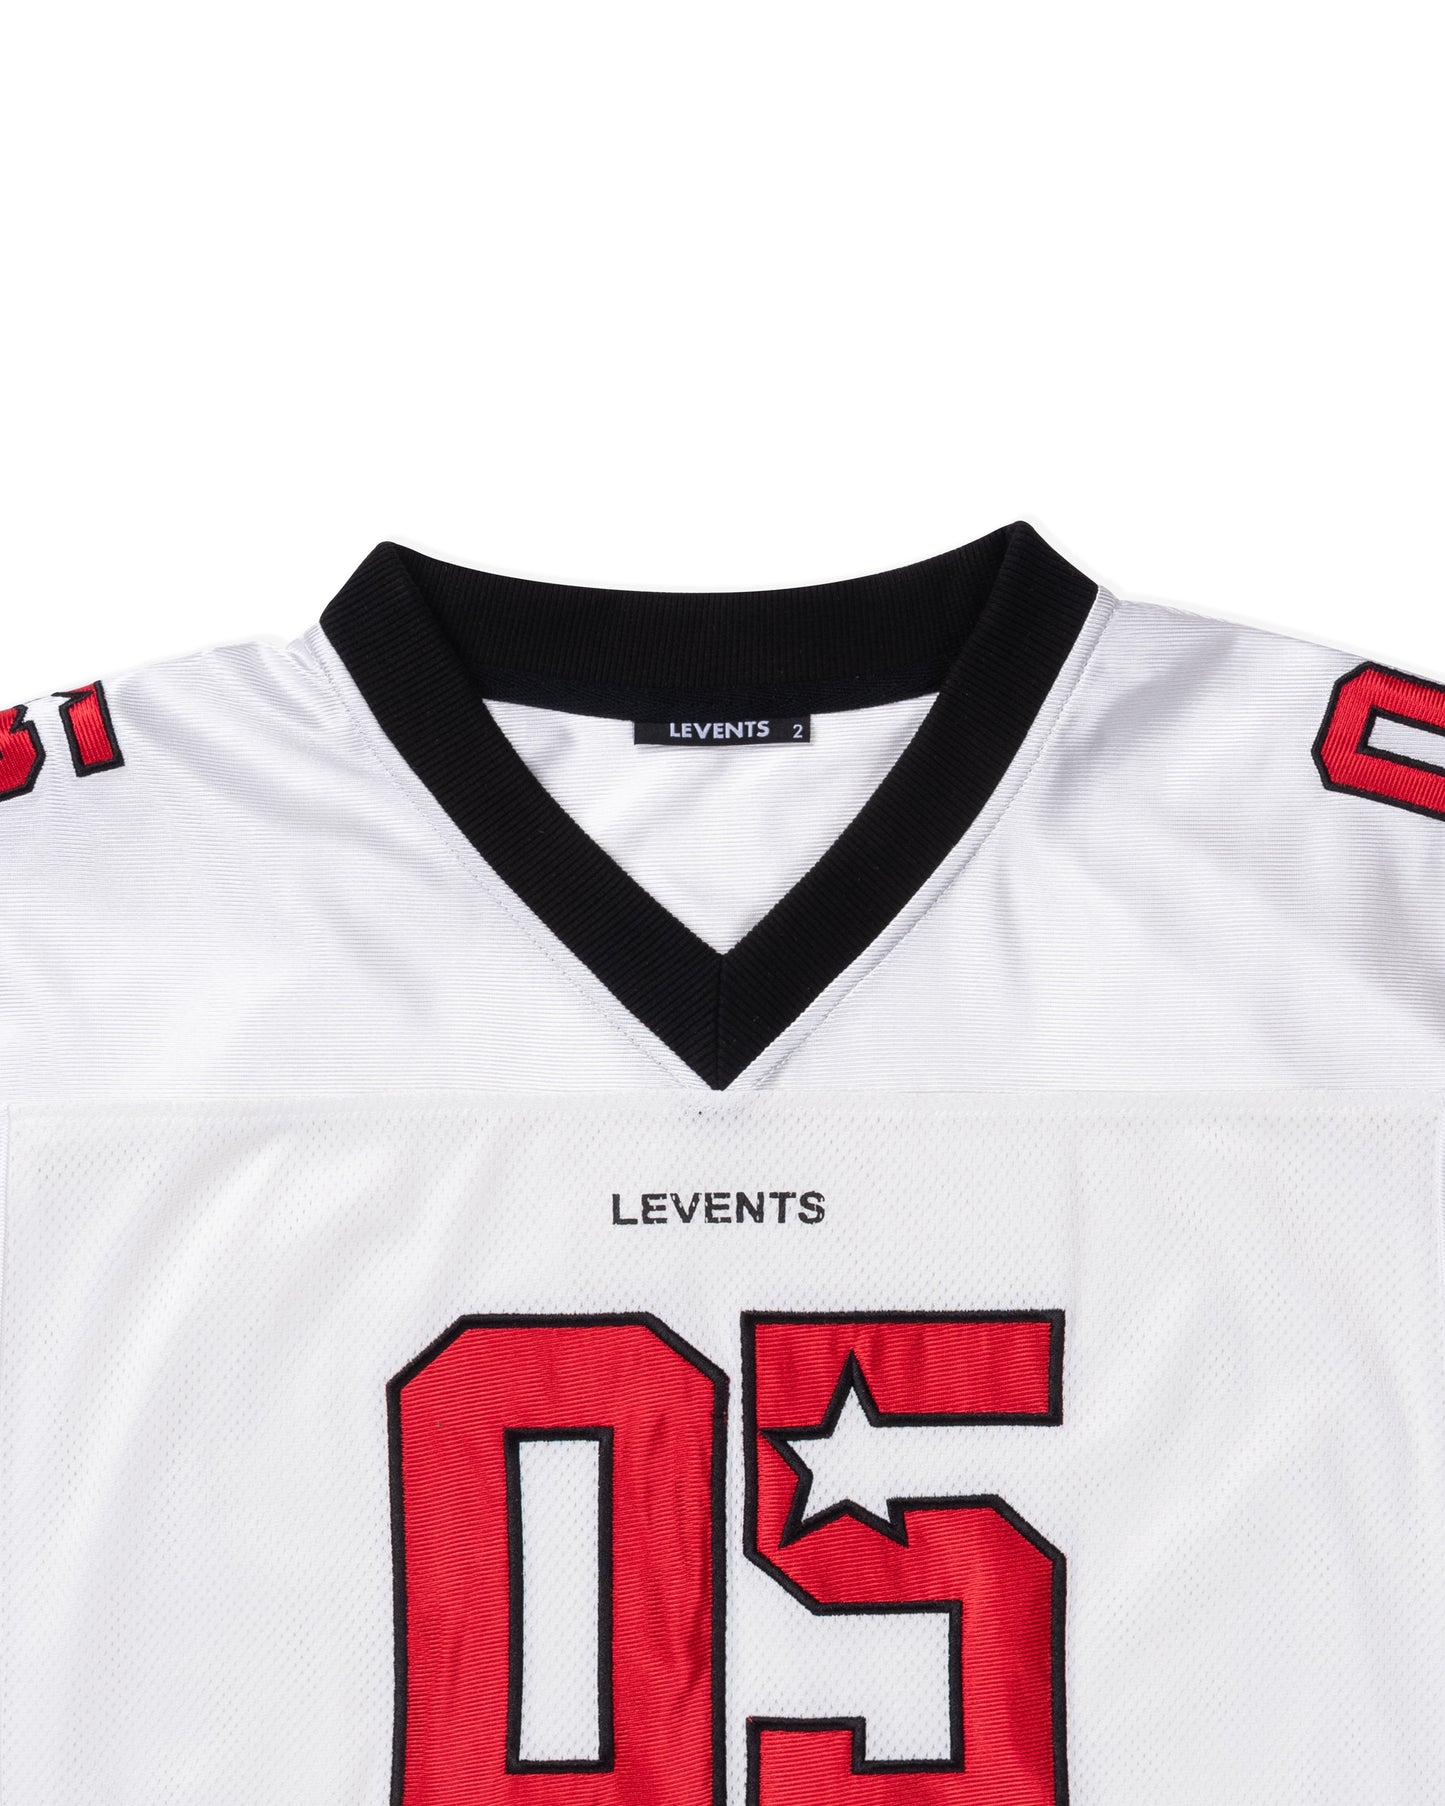 Levents® 05 Jersey/ White